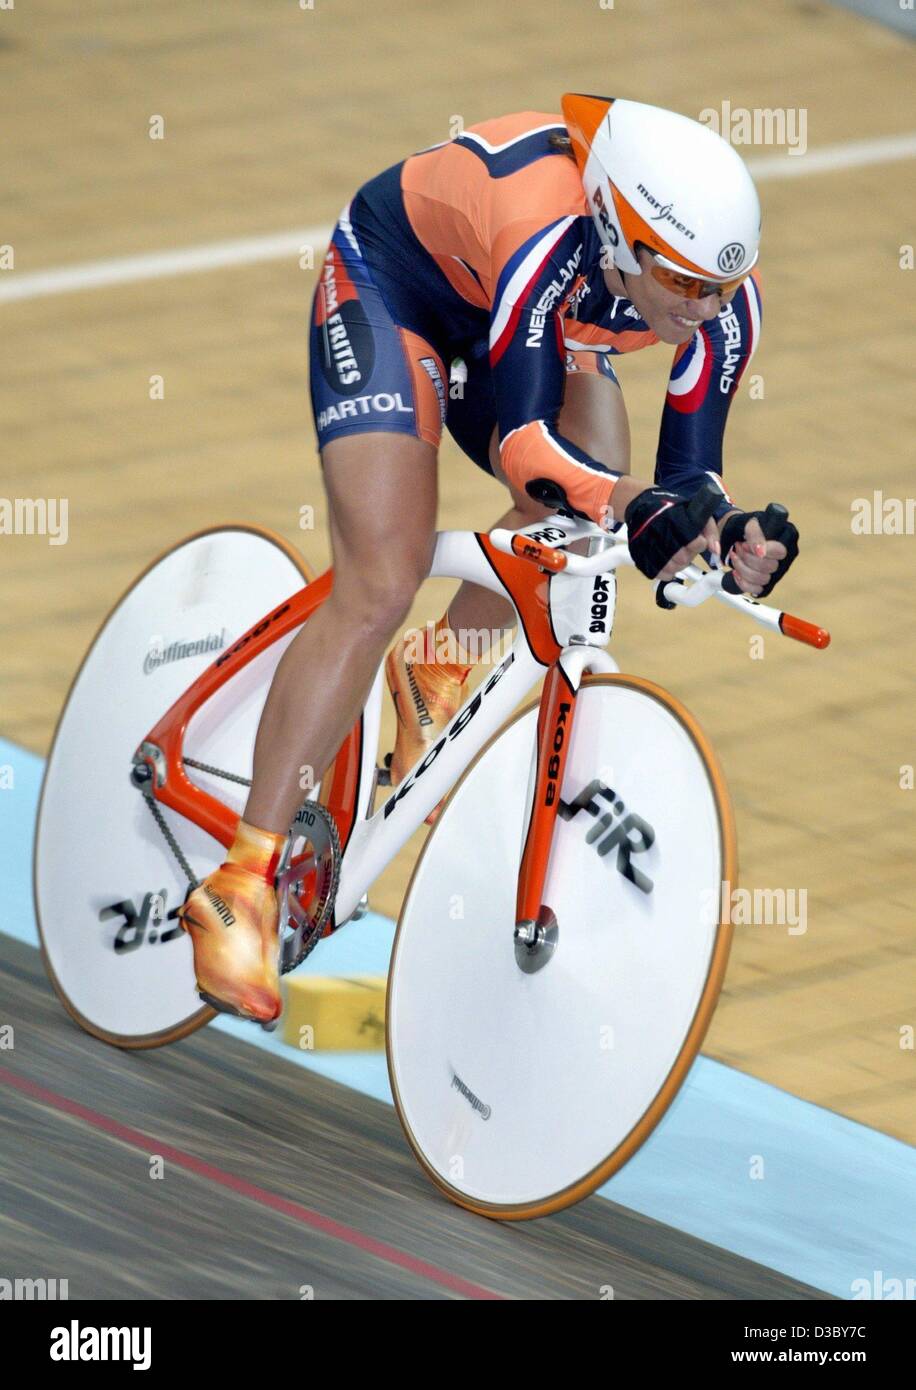 (dpa) - Dutch cyclist Leontien Zijlaard-van Moorsel races during the qualifying for the 3000m single pursuit event at the Women's Track Cycling World Championships at the Schleyer Hall in Stuttgart, Germany, 31 July 2003. She clocks best time with 3:32.022 minutes. Stock Photo